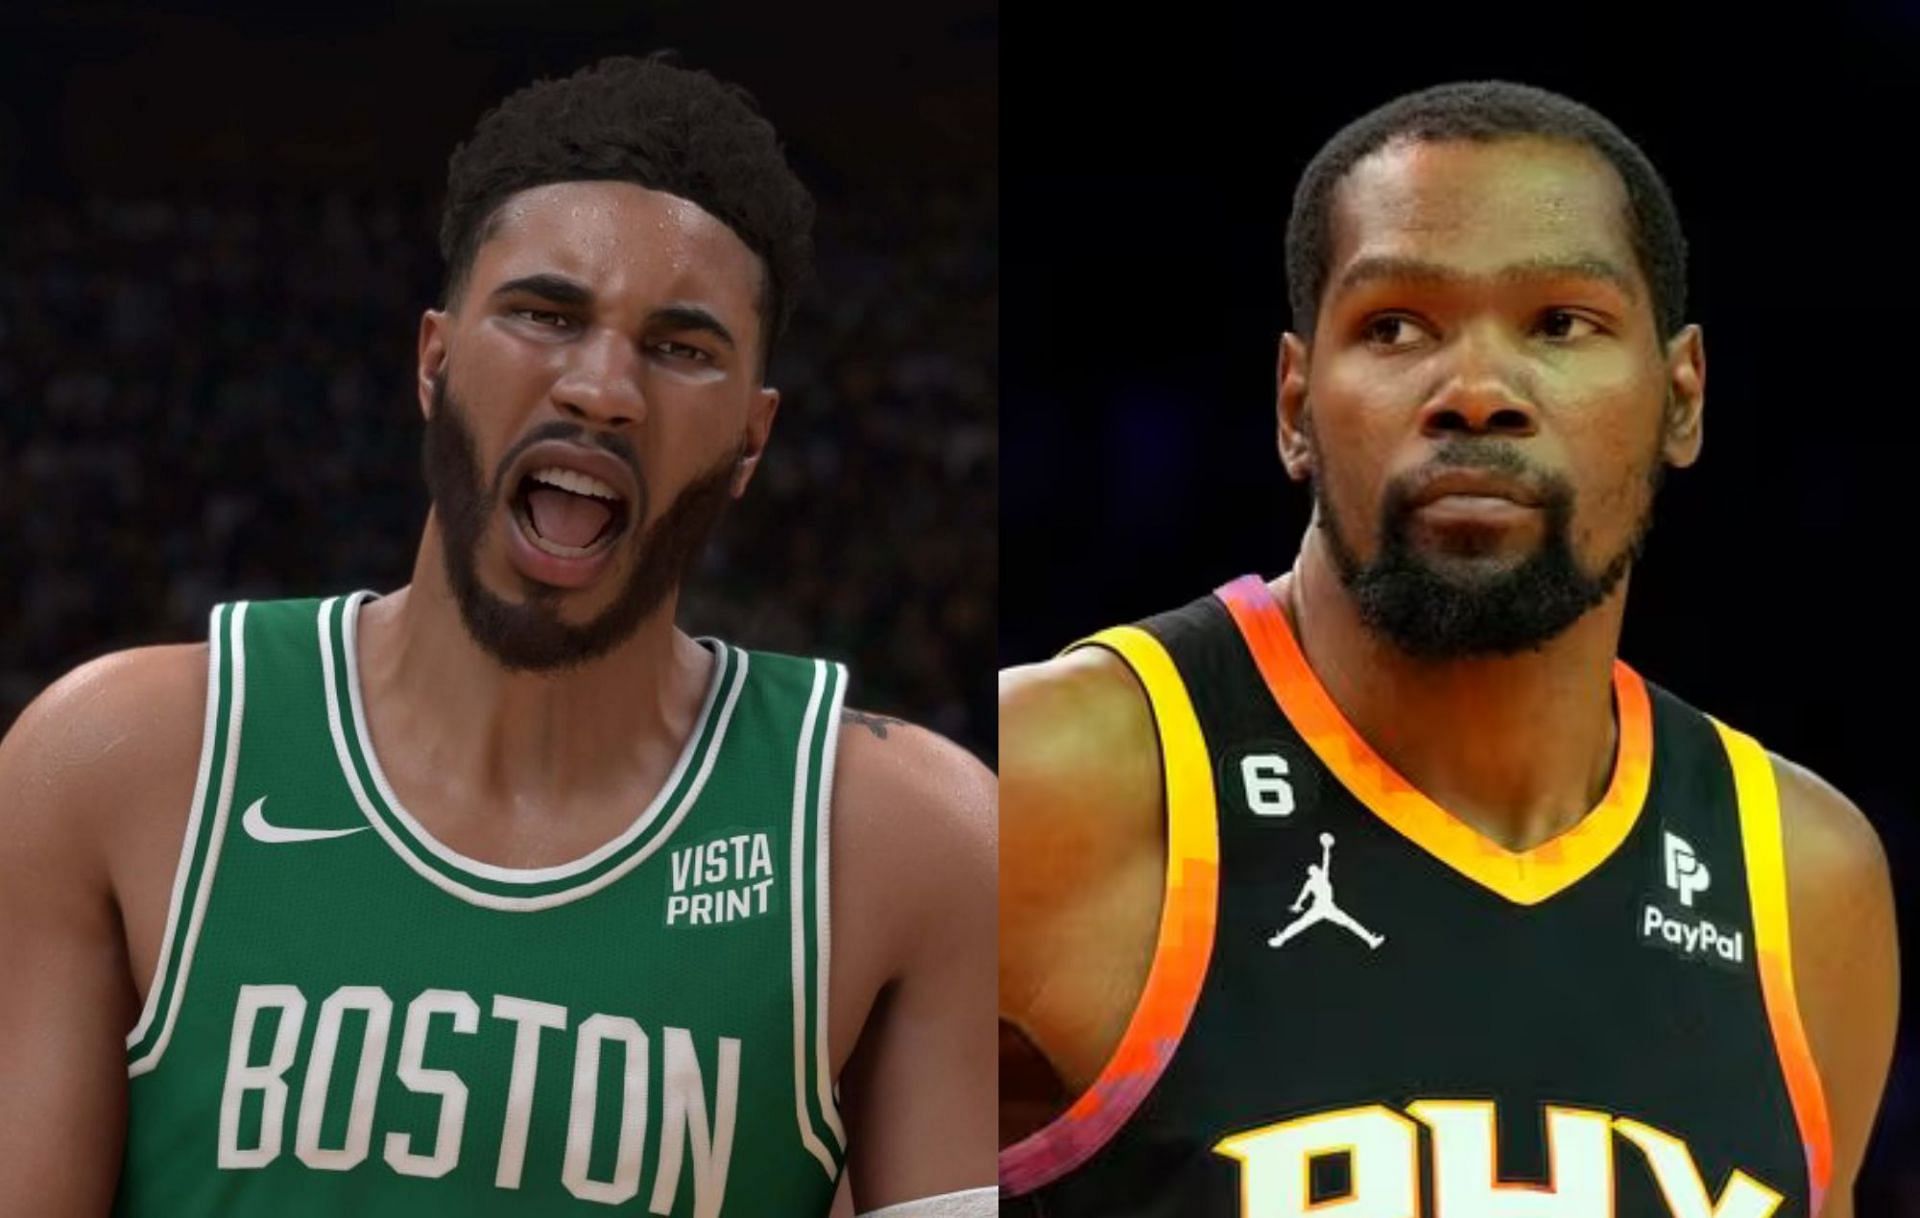 Basketball fans react to Kevin Durant complaining about NBA2k